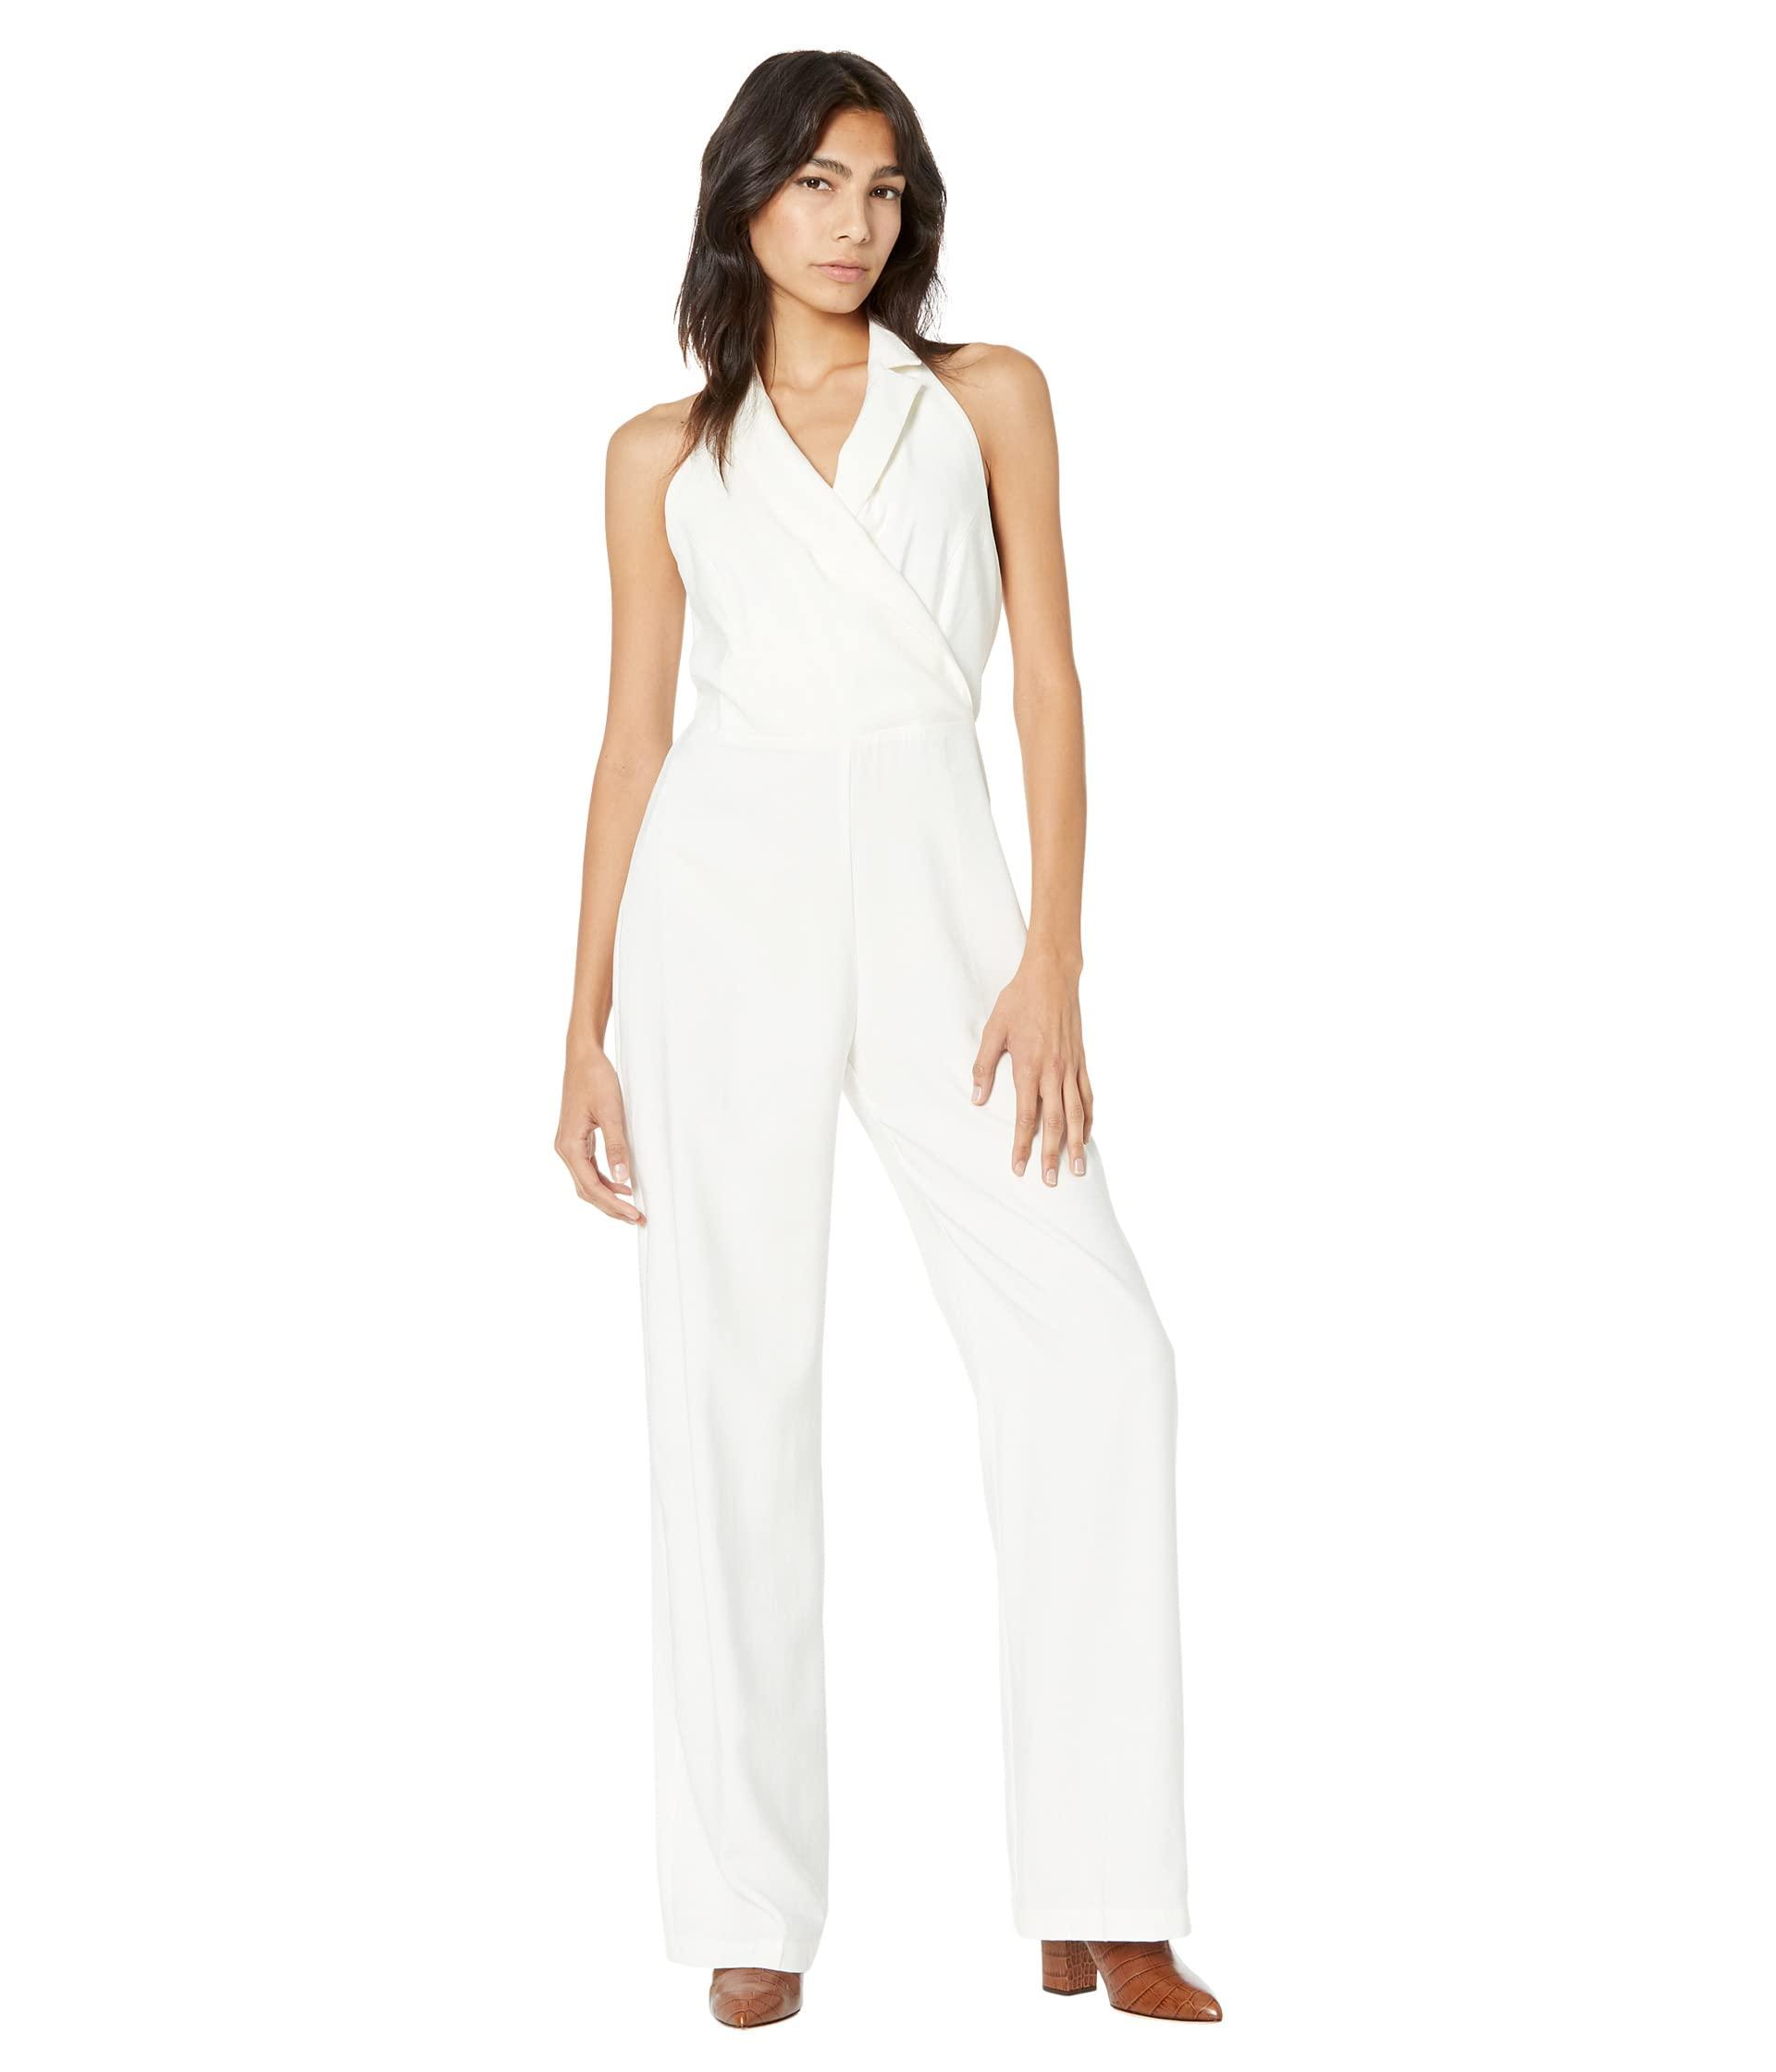 Mango Caion One-piece Suit in White | Lyst